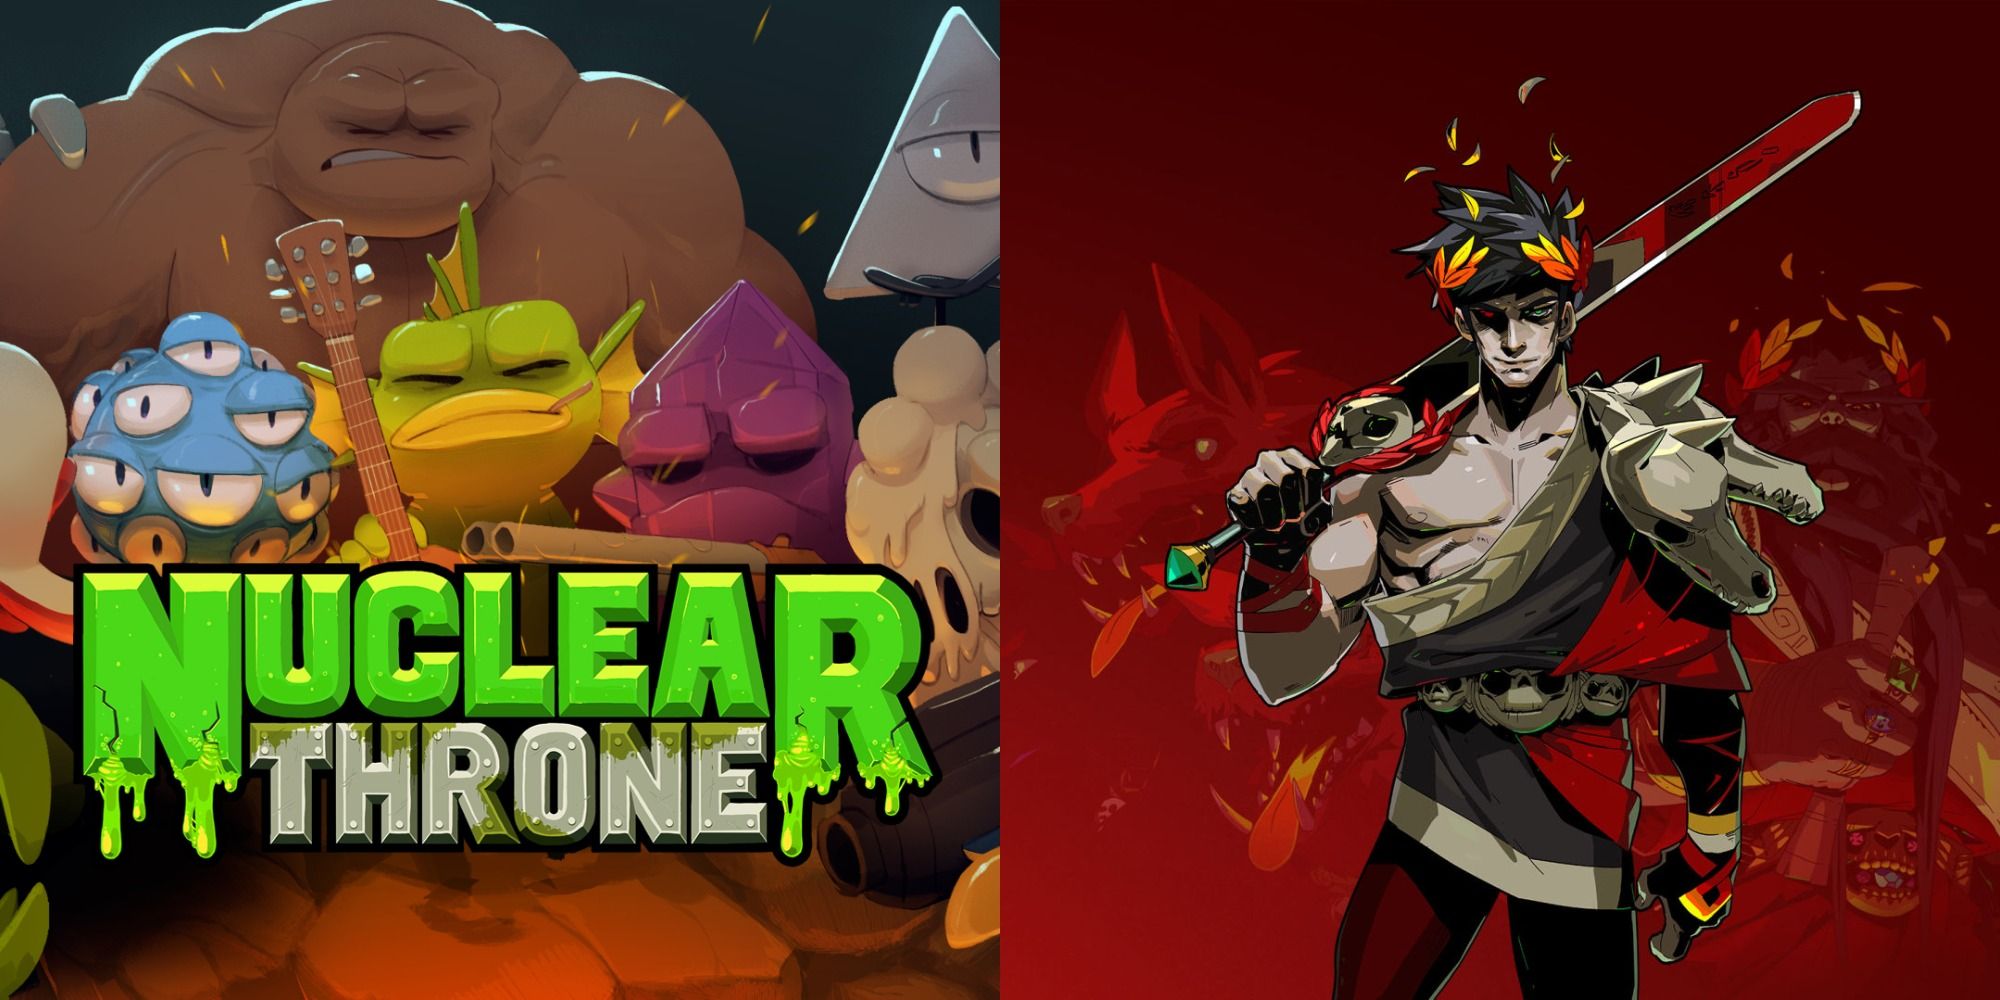 Split image showing covers of the video games Nuclear Throne and Hades